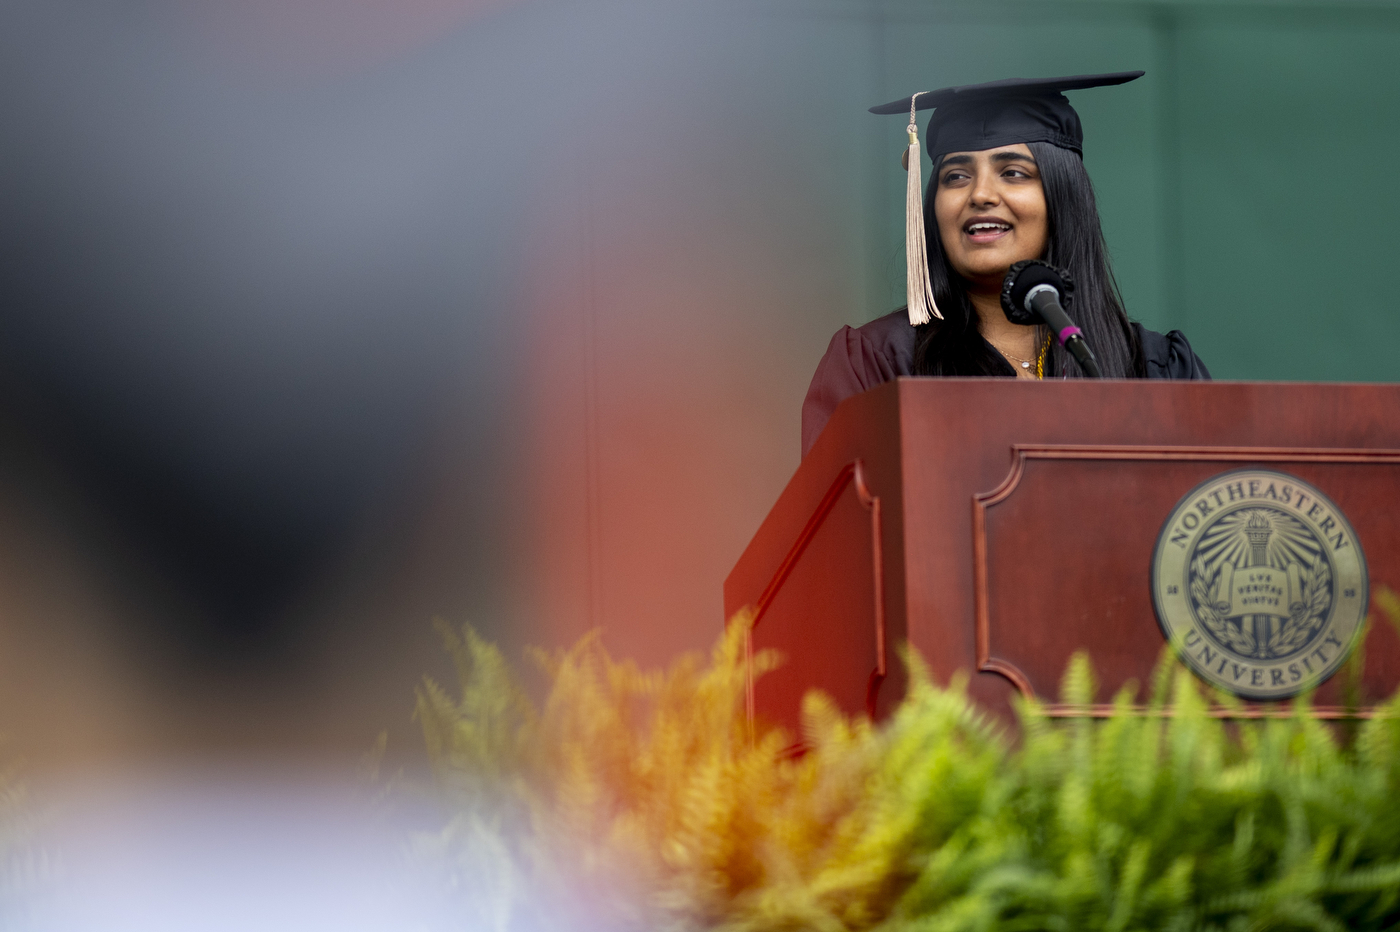 Neha Jain, who received a bachelor’s degree in business administration, said her experiences at Northeastern helped her interact with other cultures and adapt to change. 